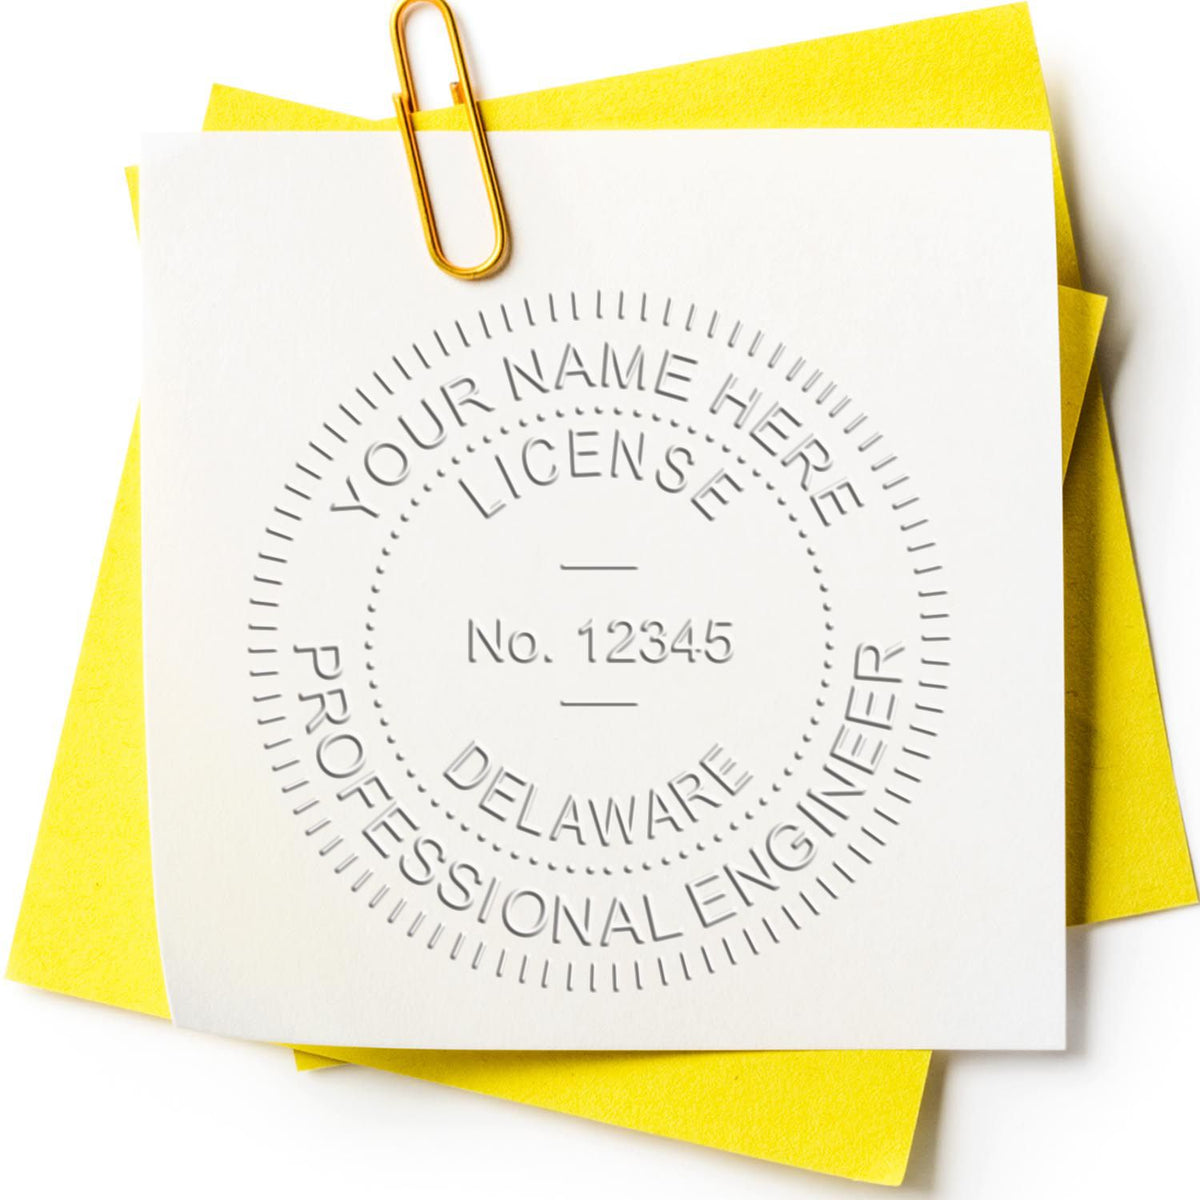 A photograph of the Soft Delaware Professional Engineer Seal stamp impression reveals a vivid, professional image of the on paper.